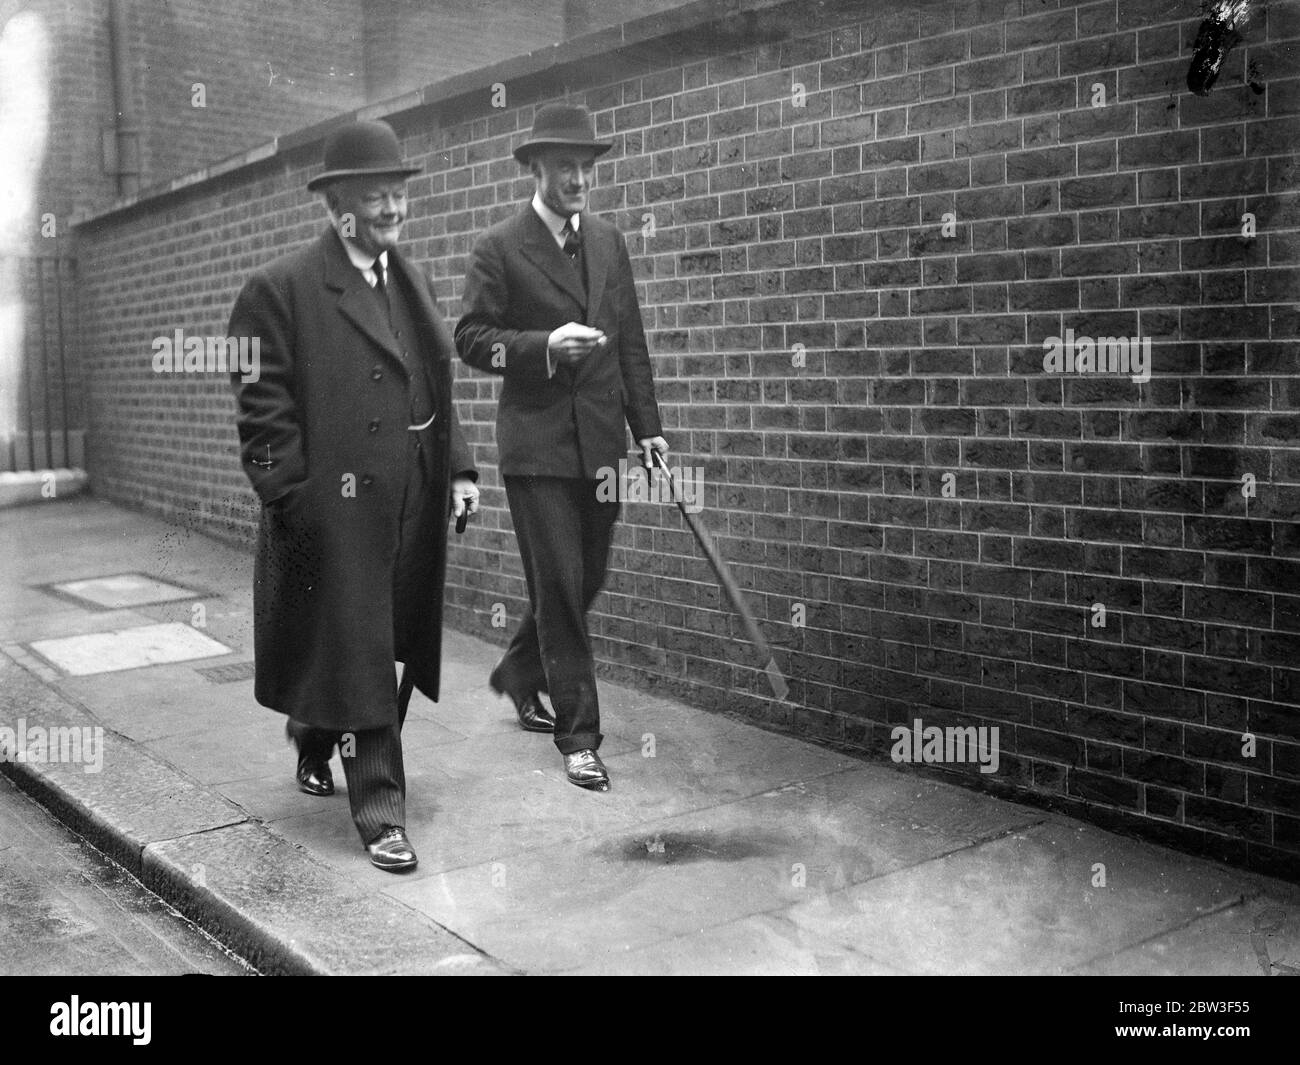 Ministers leave after Cabinet meeting . A Cabinet meeting was held at Downing Street when the situation brought about by Germany ' s reoccupation of the Rhineland was considered . Photo shows , Lord Hailsham , the Lord Chancellor ( left ) and Lord Swintop , the Air Minister , leaving after the meeting . 9 March 1936 Stock Photo